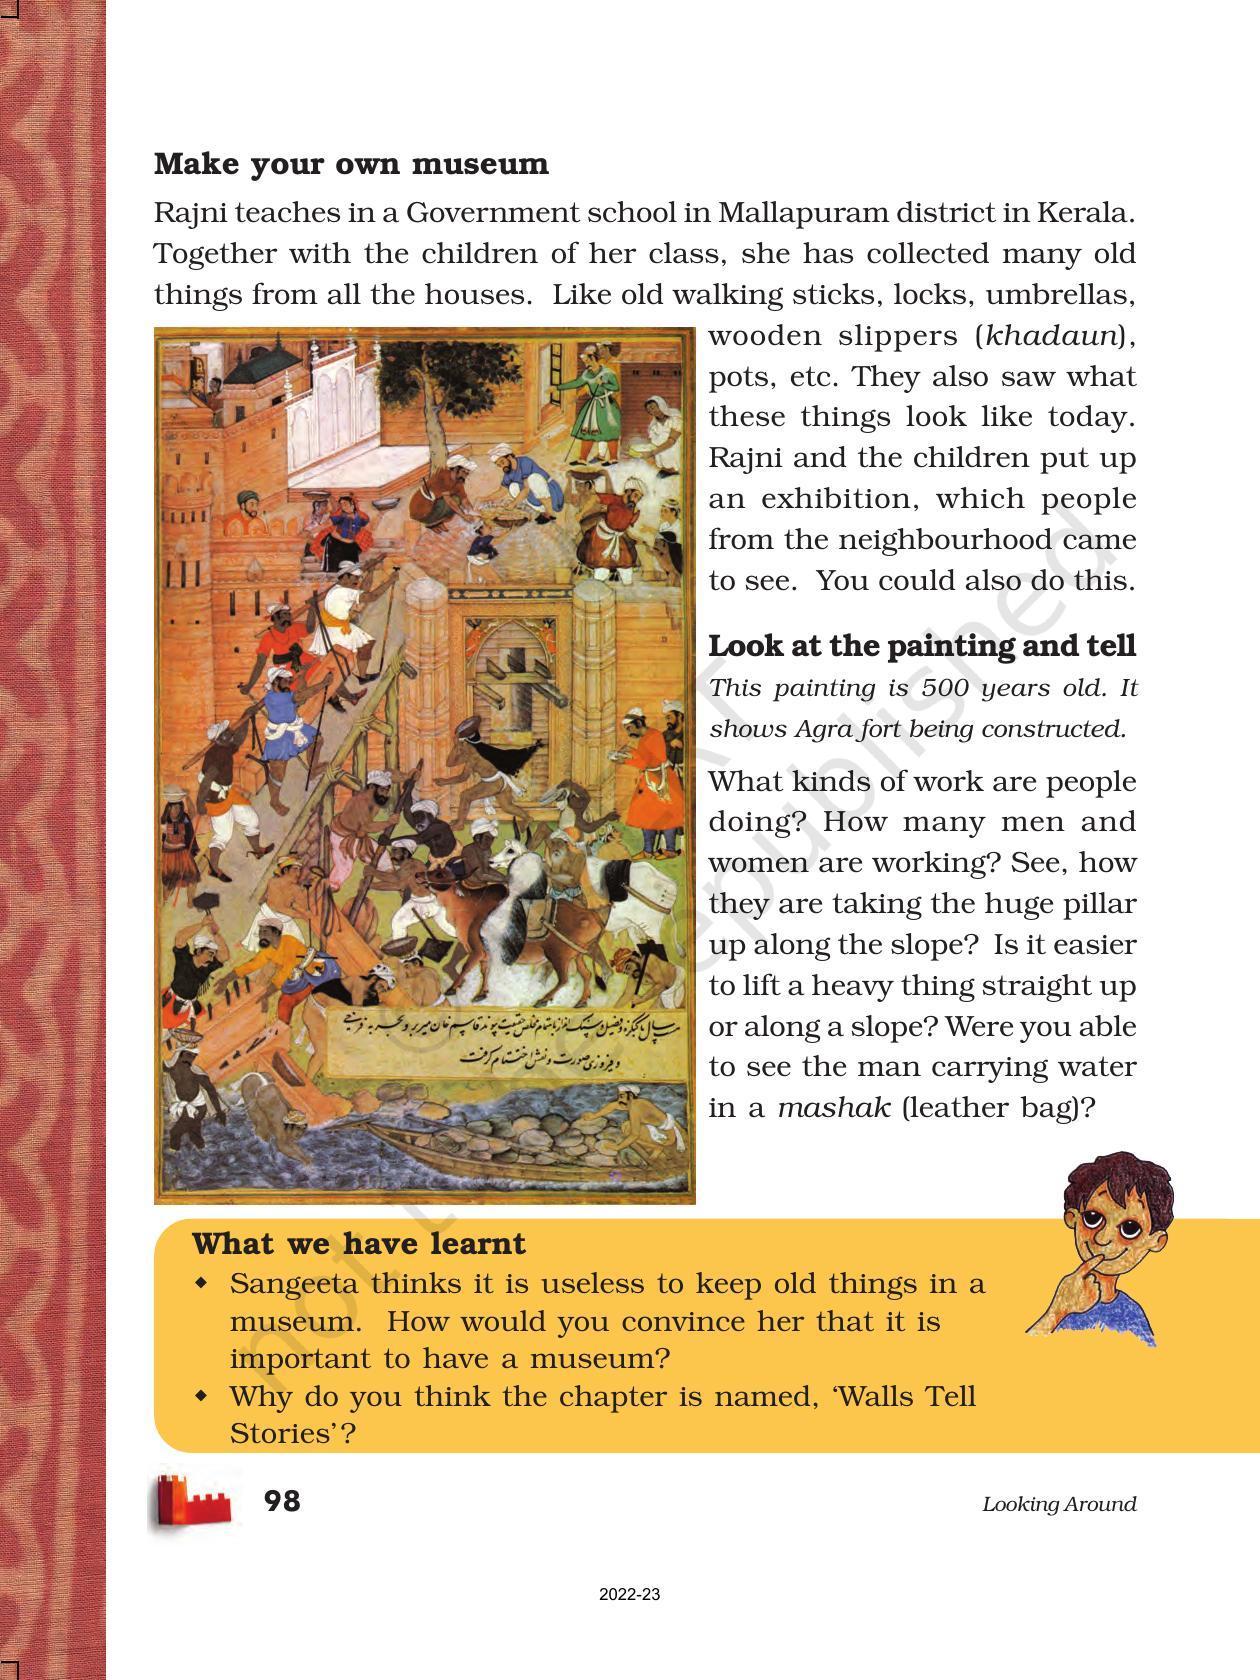 NCERT Book for Class 5 EVS Chapter 10 Walls Tell Stories - Page 12